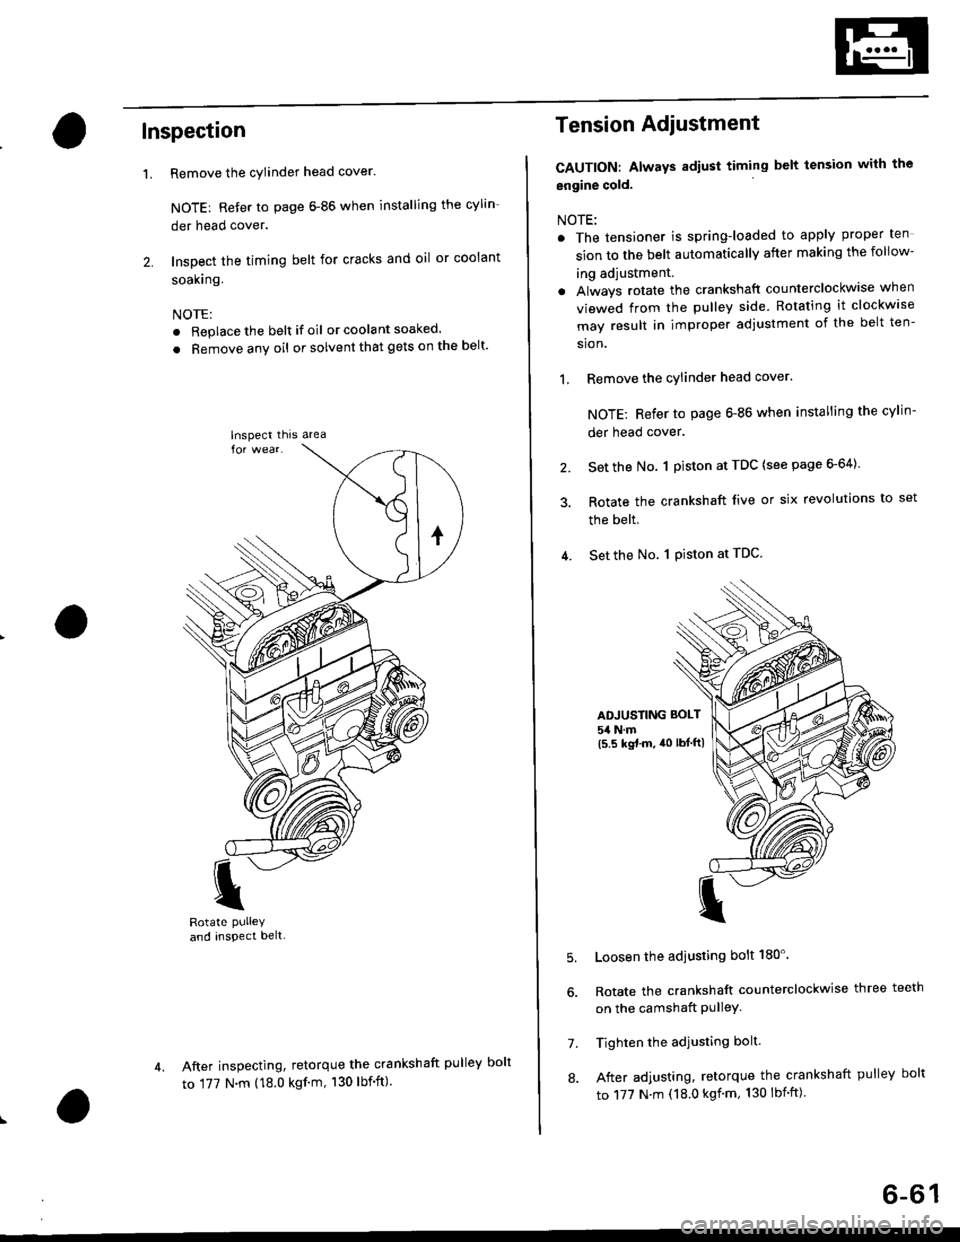 HONDA CIVIC 2000 6.G Owners Guide Inspection
Remove the cylinder head cover.
NOTE: Refer to page 6-86 when installing the cylin-
der head cover.
Inspect the timing belt for cracks and oil or coolant
soakrng.
NOTE:
. Replace the belt i